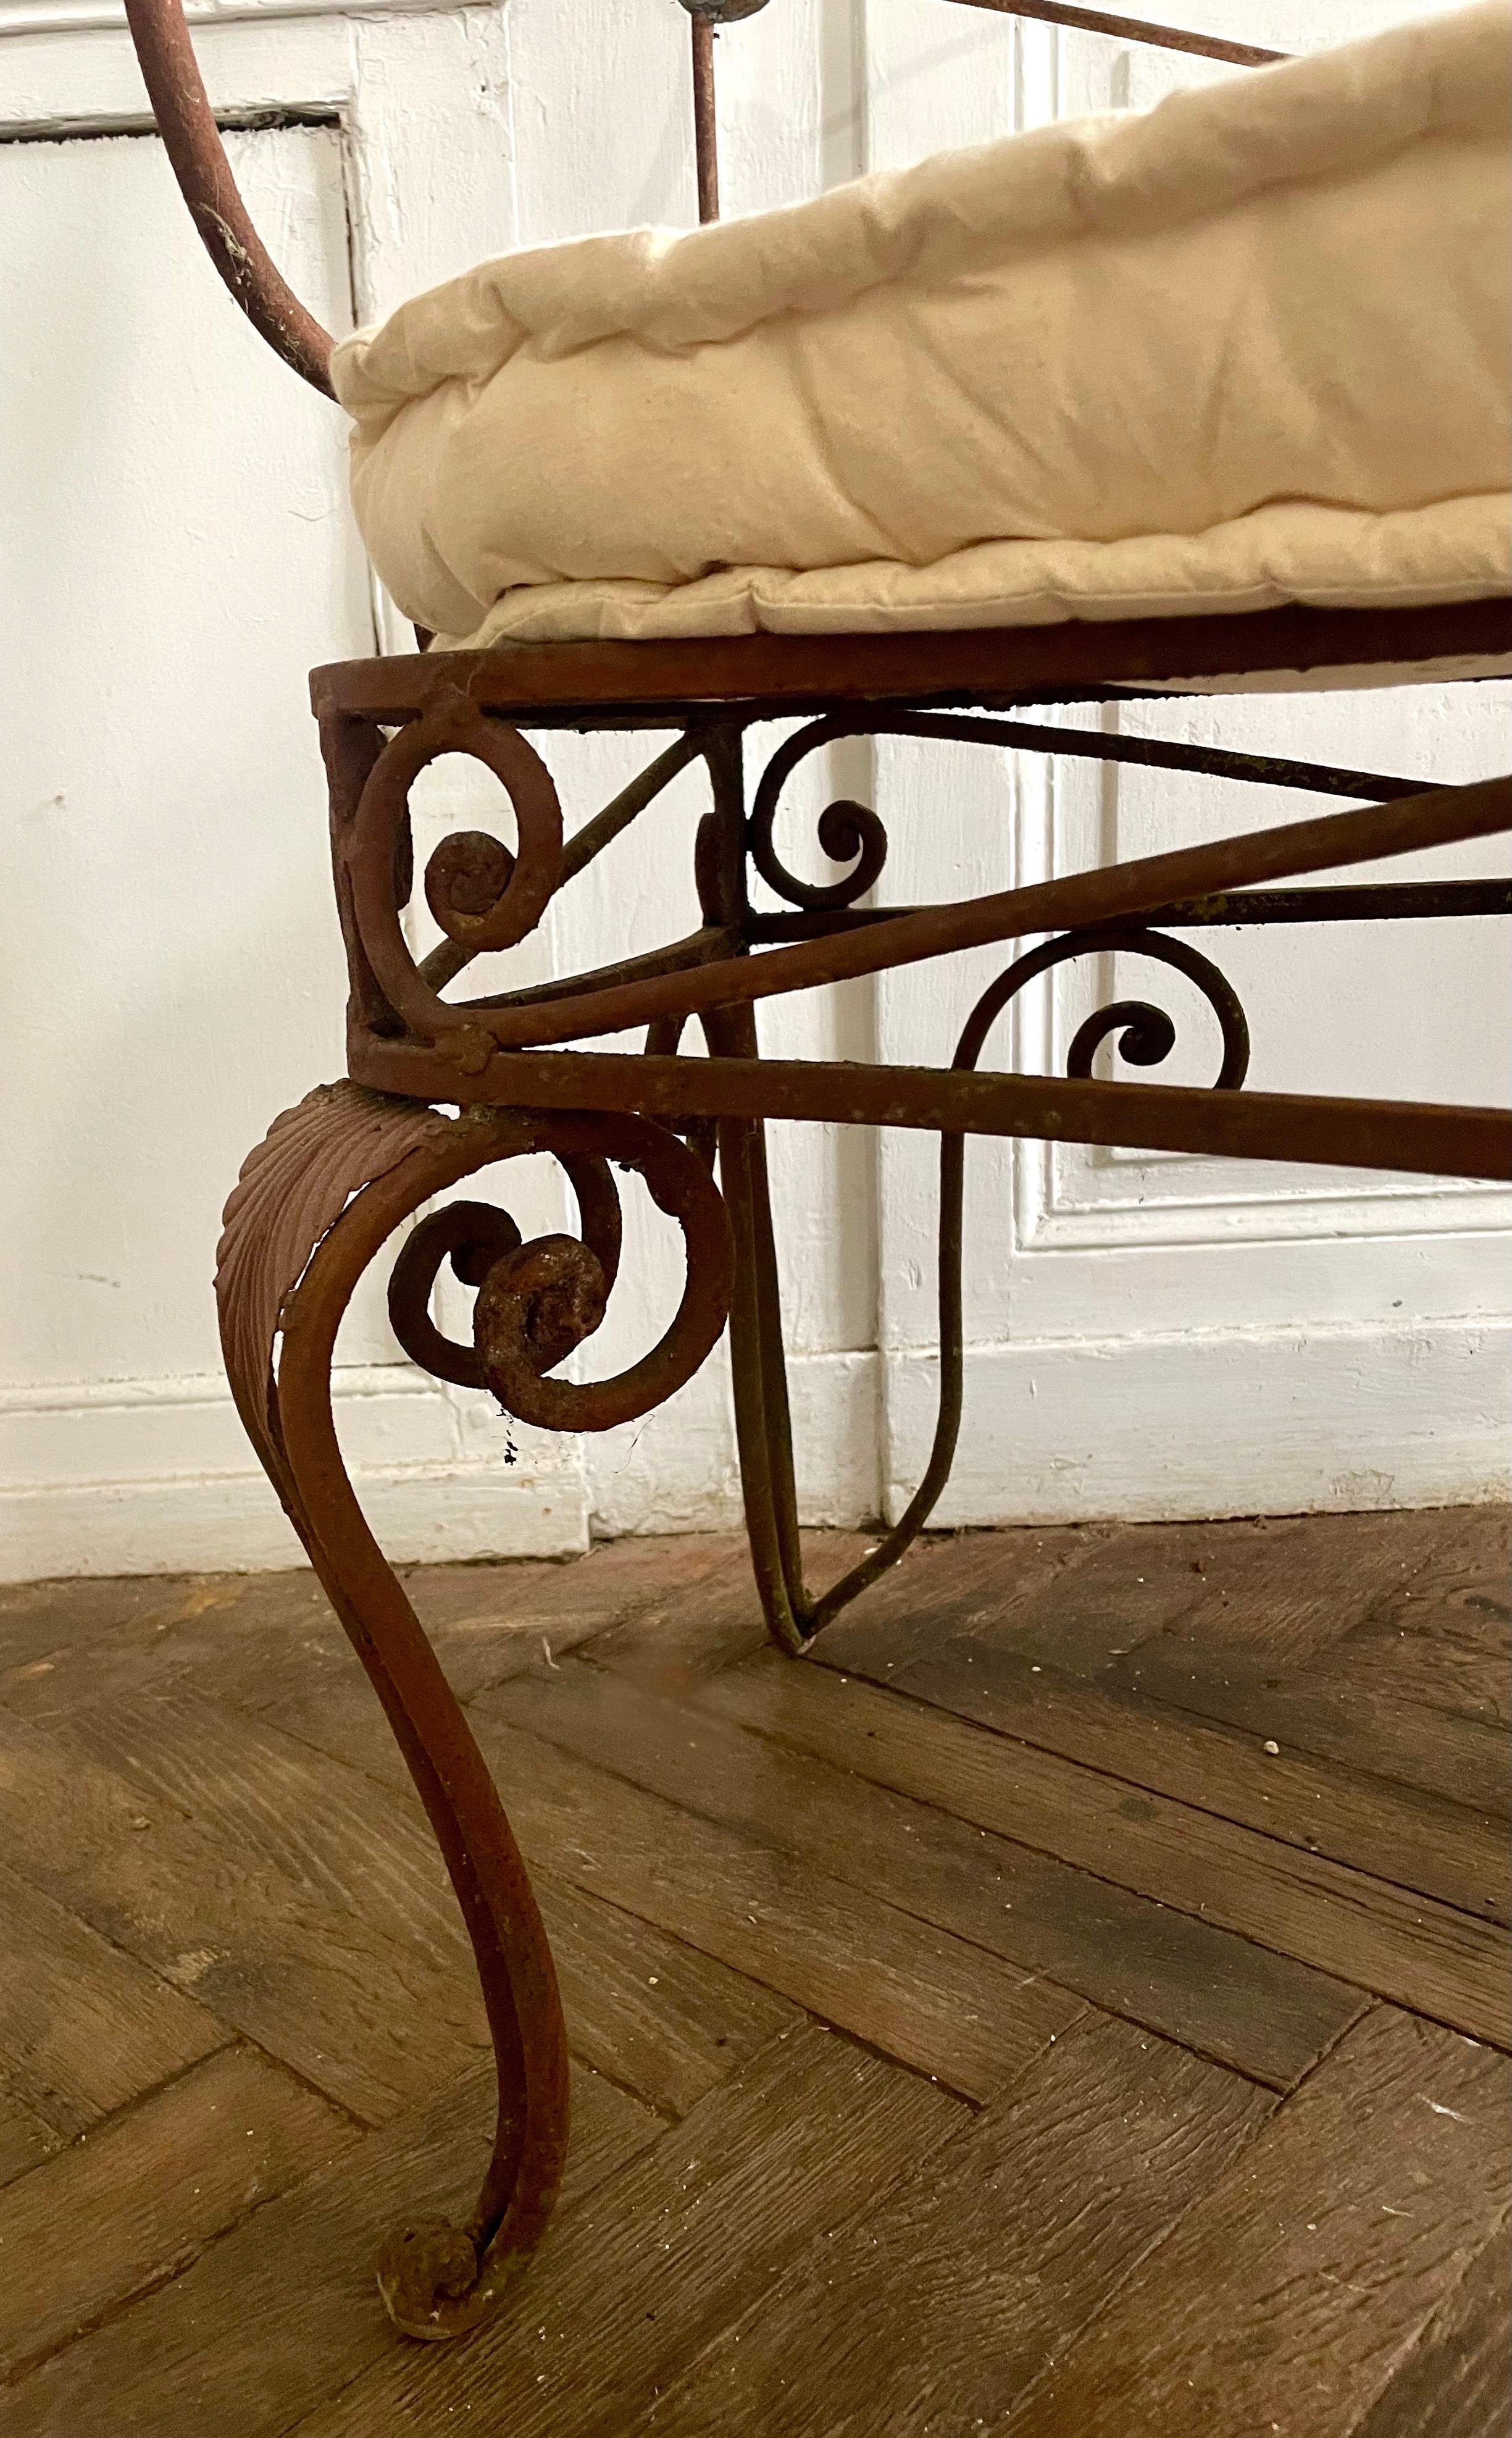 Sublime pair of wrought iron sofa benches from the 20th century.
Art Nouveau style
For park, garden, outdoor.
File very nicely worked. Armrests.
Ecru beige cushion for the seat.
Very nice models.
Very decorative in a park, garden, pergola, at